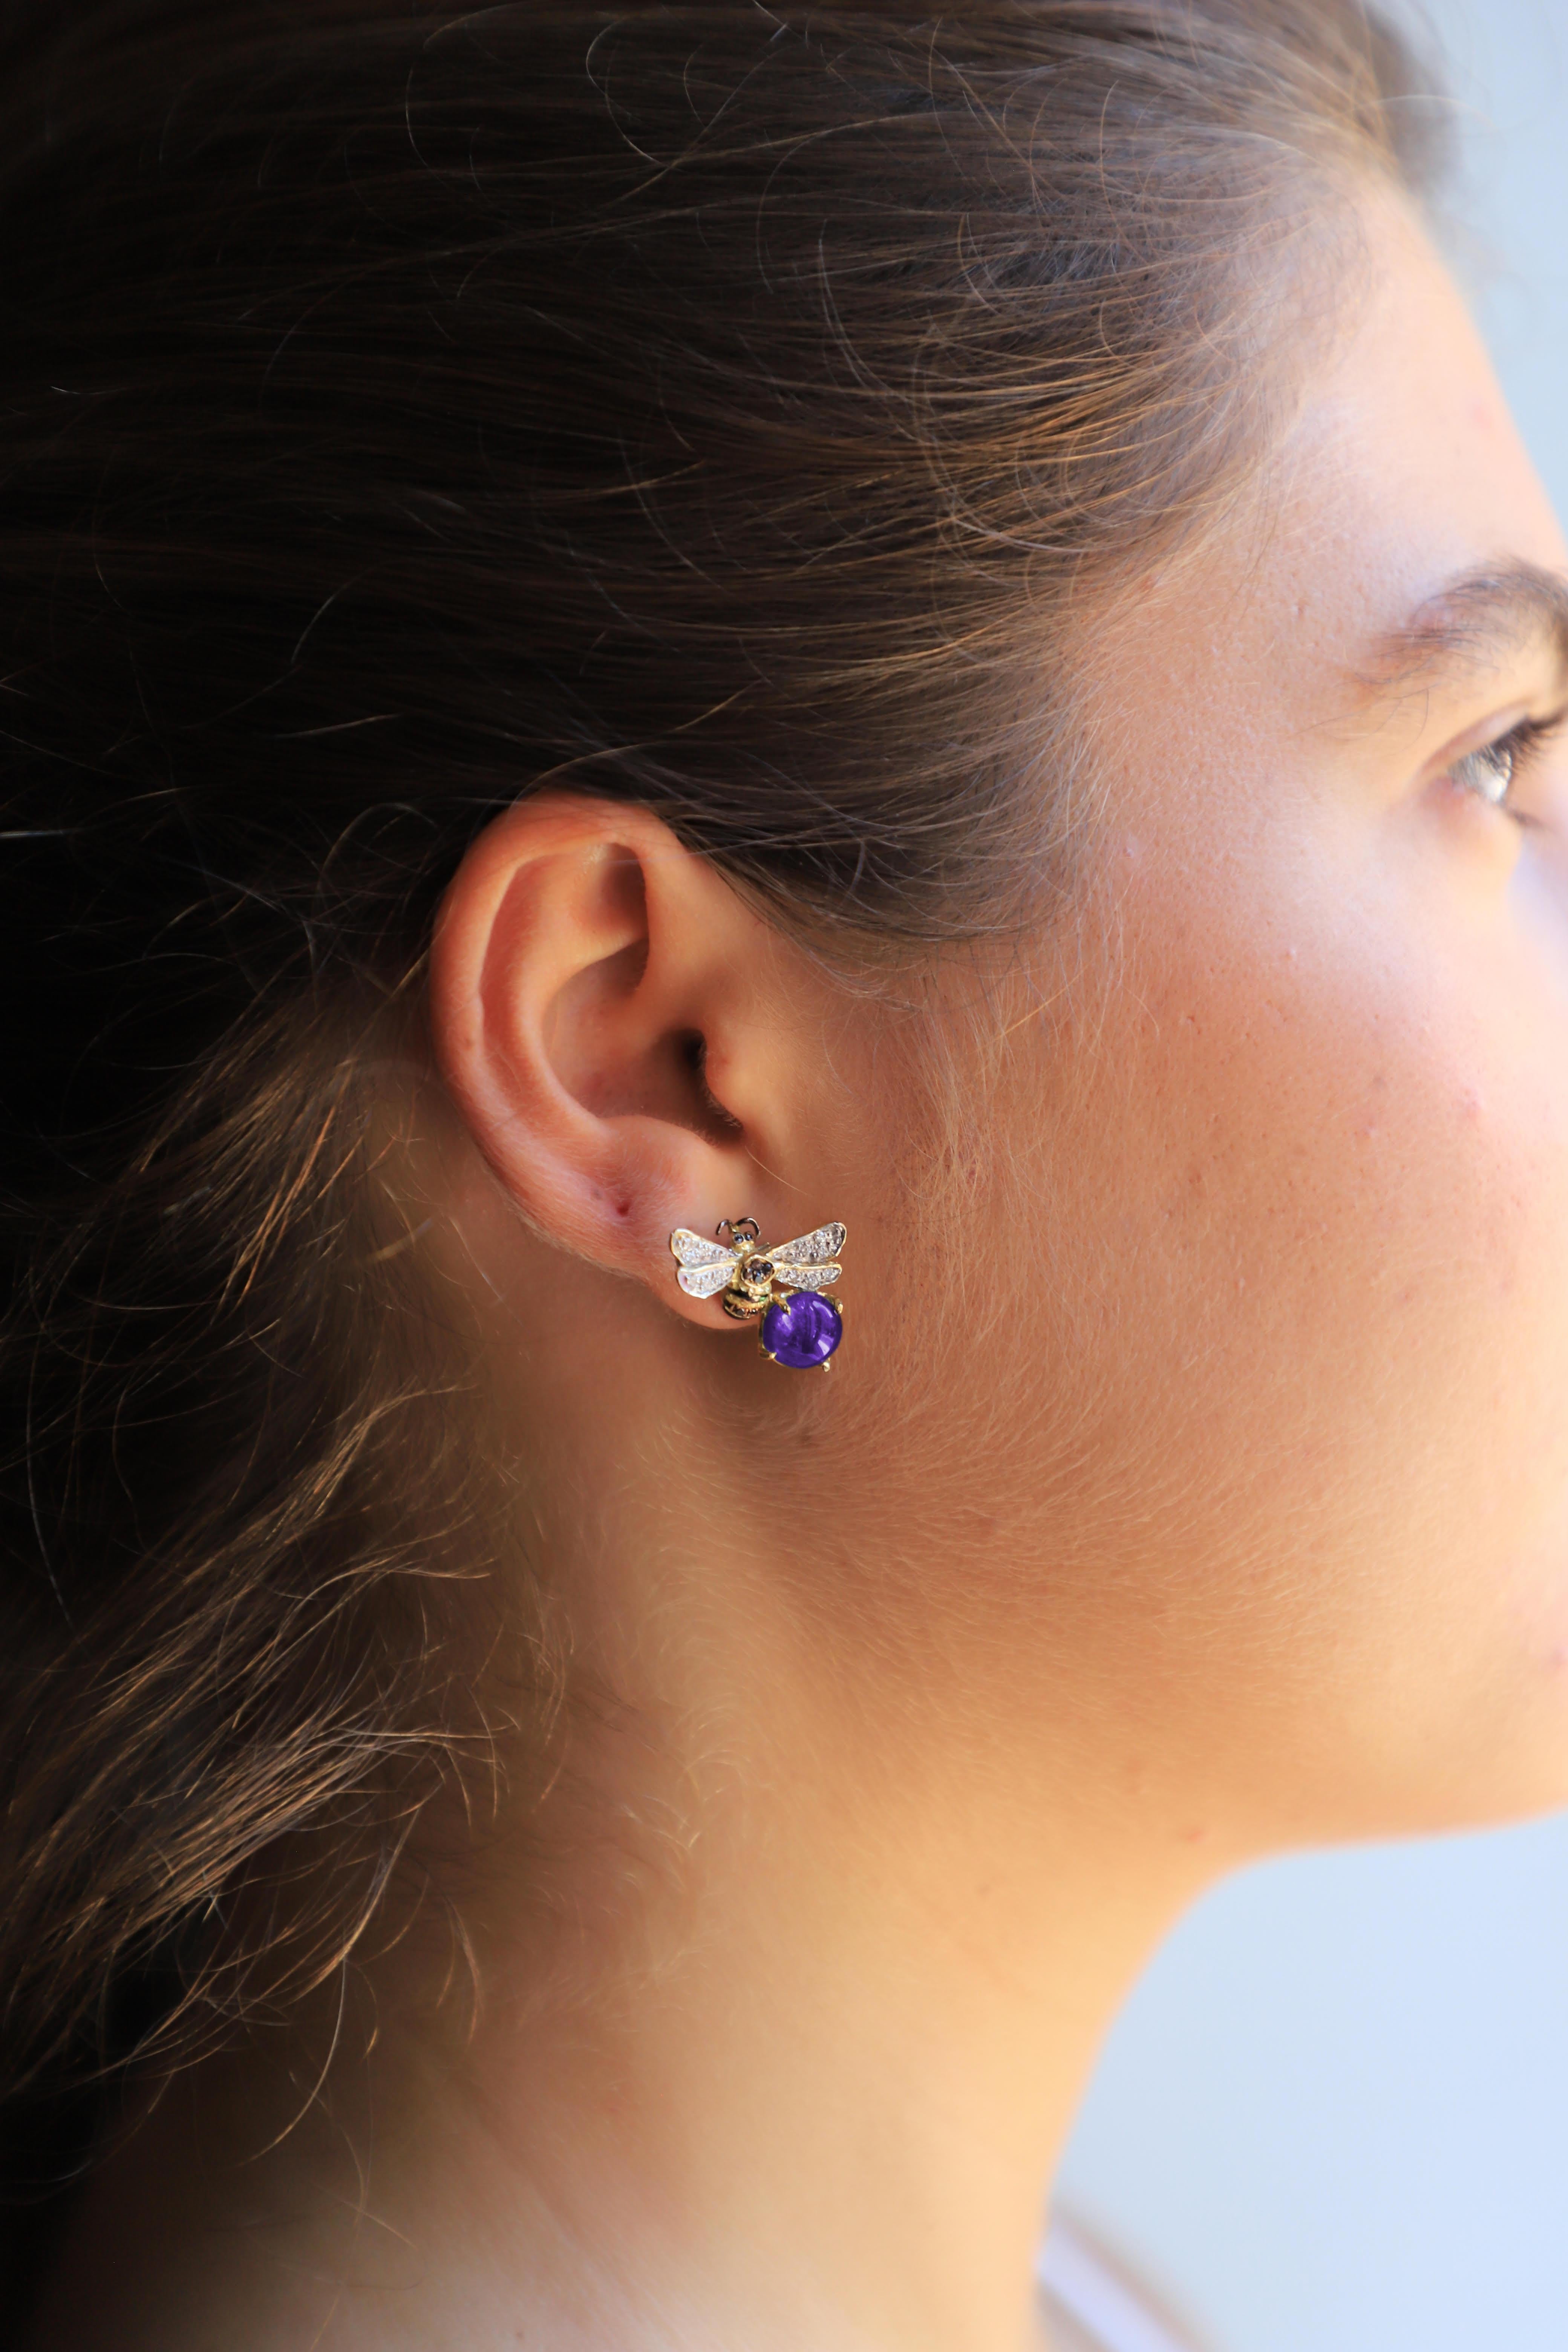 Rossella Ugolini Bees Collection, a beautiful pair of Bees Stud Earrings handcrafted in 18 Karats Yellow Gold and adorned with a luminous Violet Amethyst stone, White and Black Diamonds.  
Dimensions: 0.78 in. (2 cm) x 0.78 in. (2 cm) x 0.23 in.